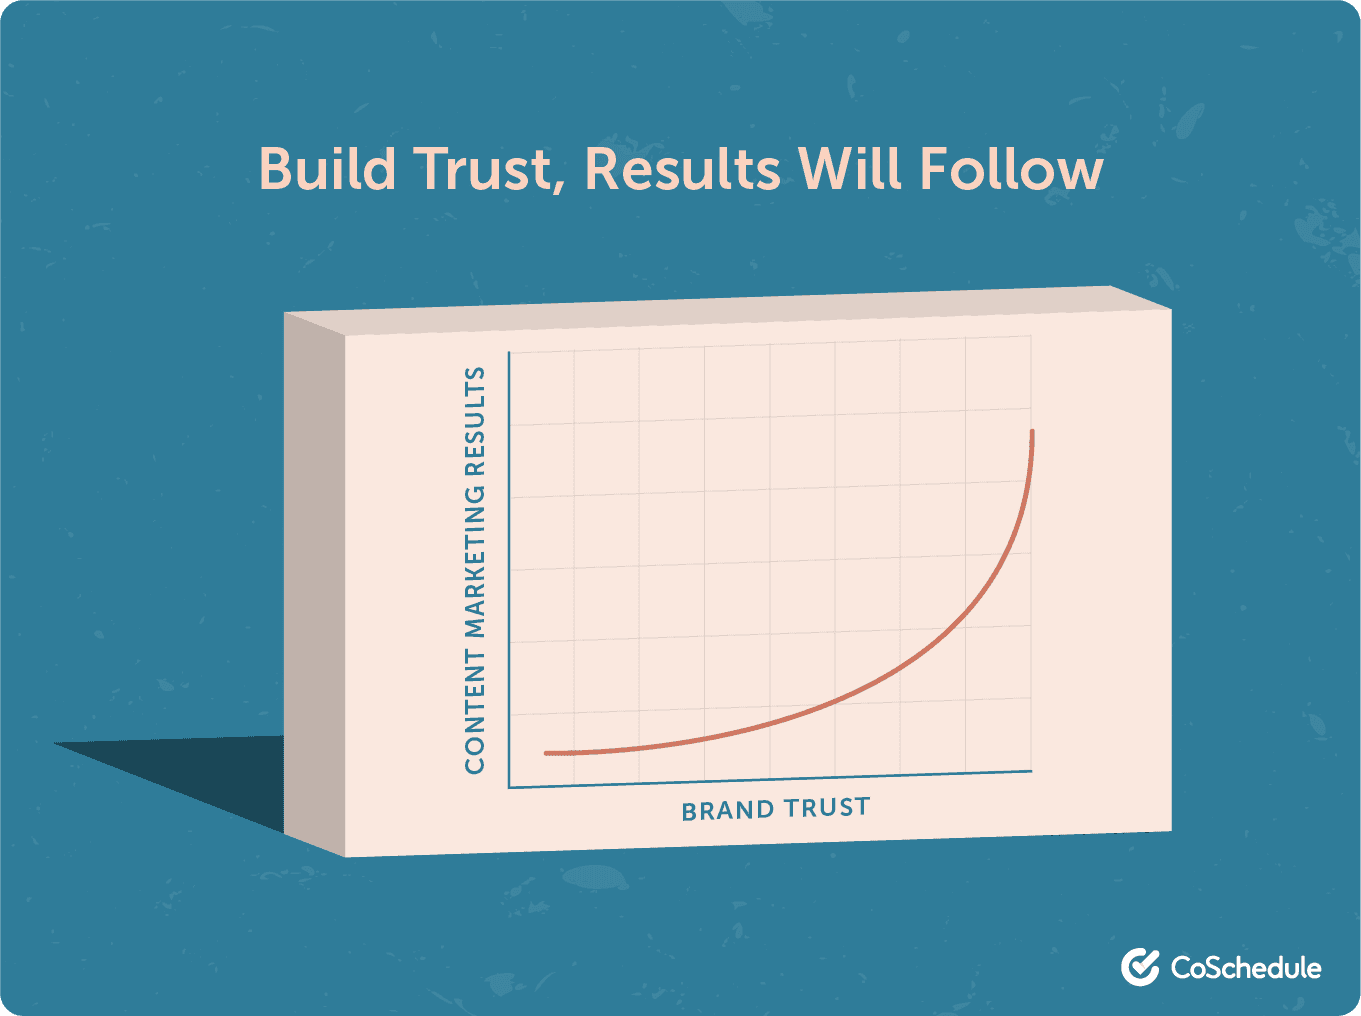 Build trust to get results